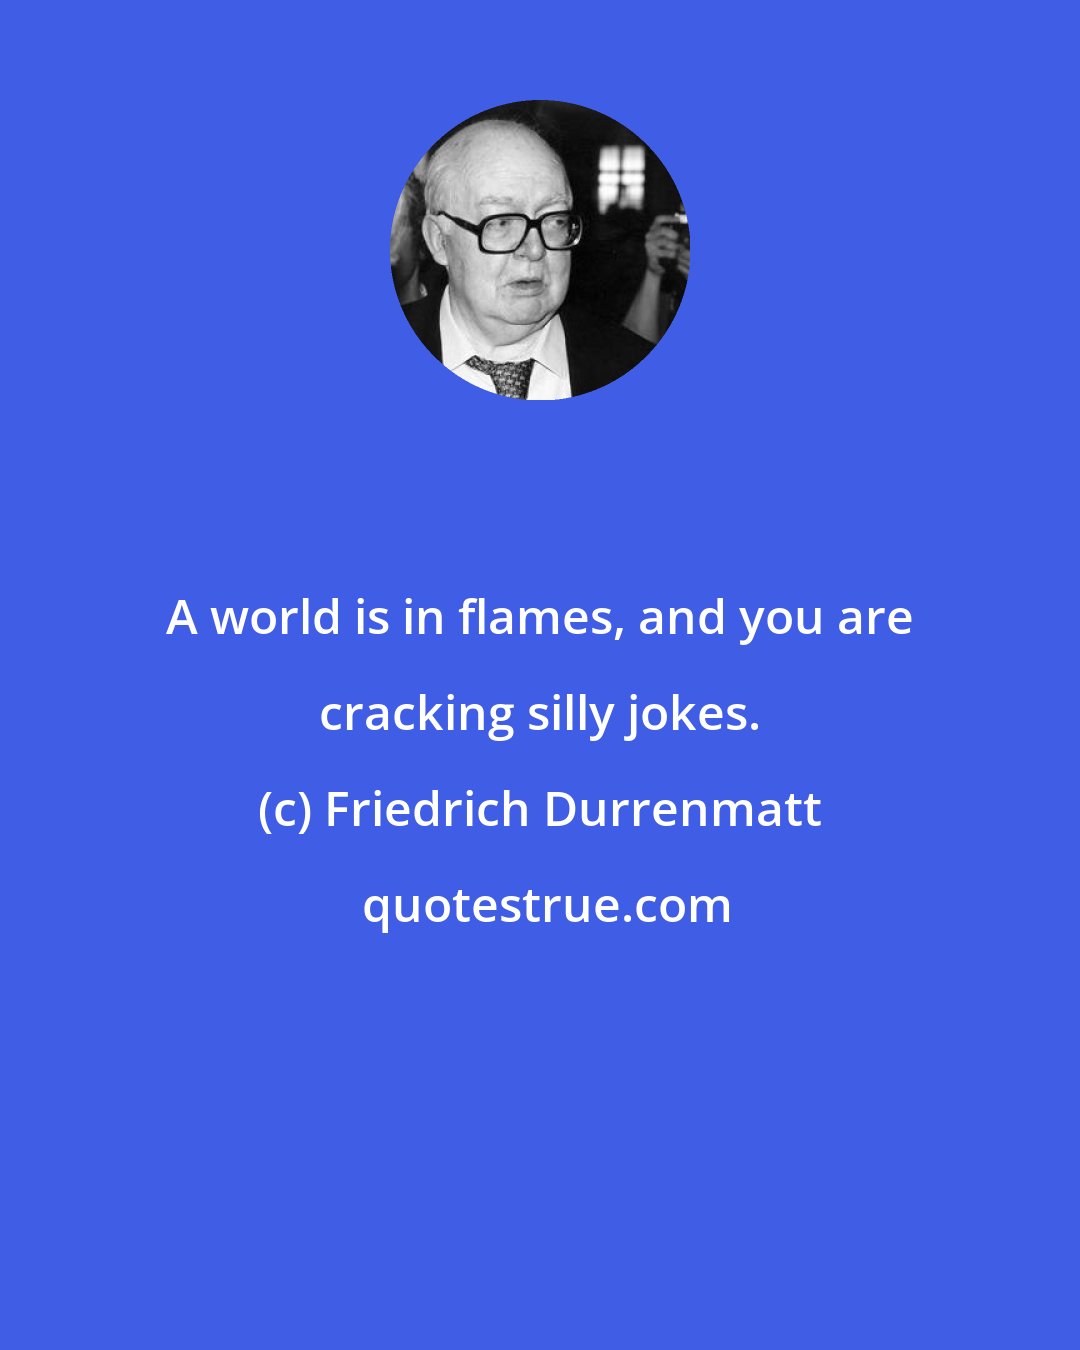 Friedrich Durrenmatt: A world is in flames, and you are cracking silly jokes.